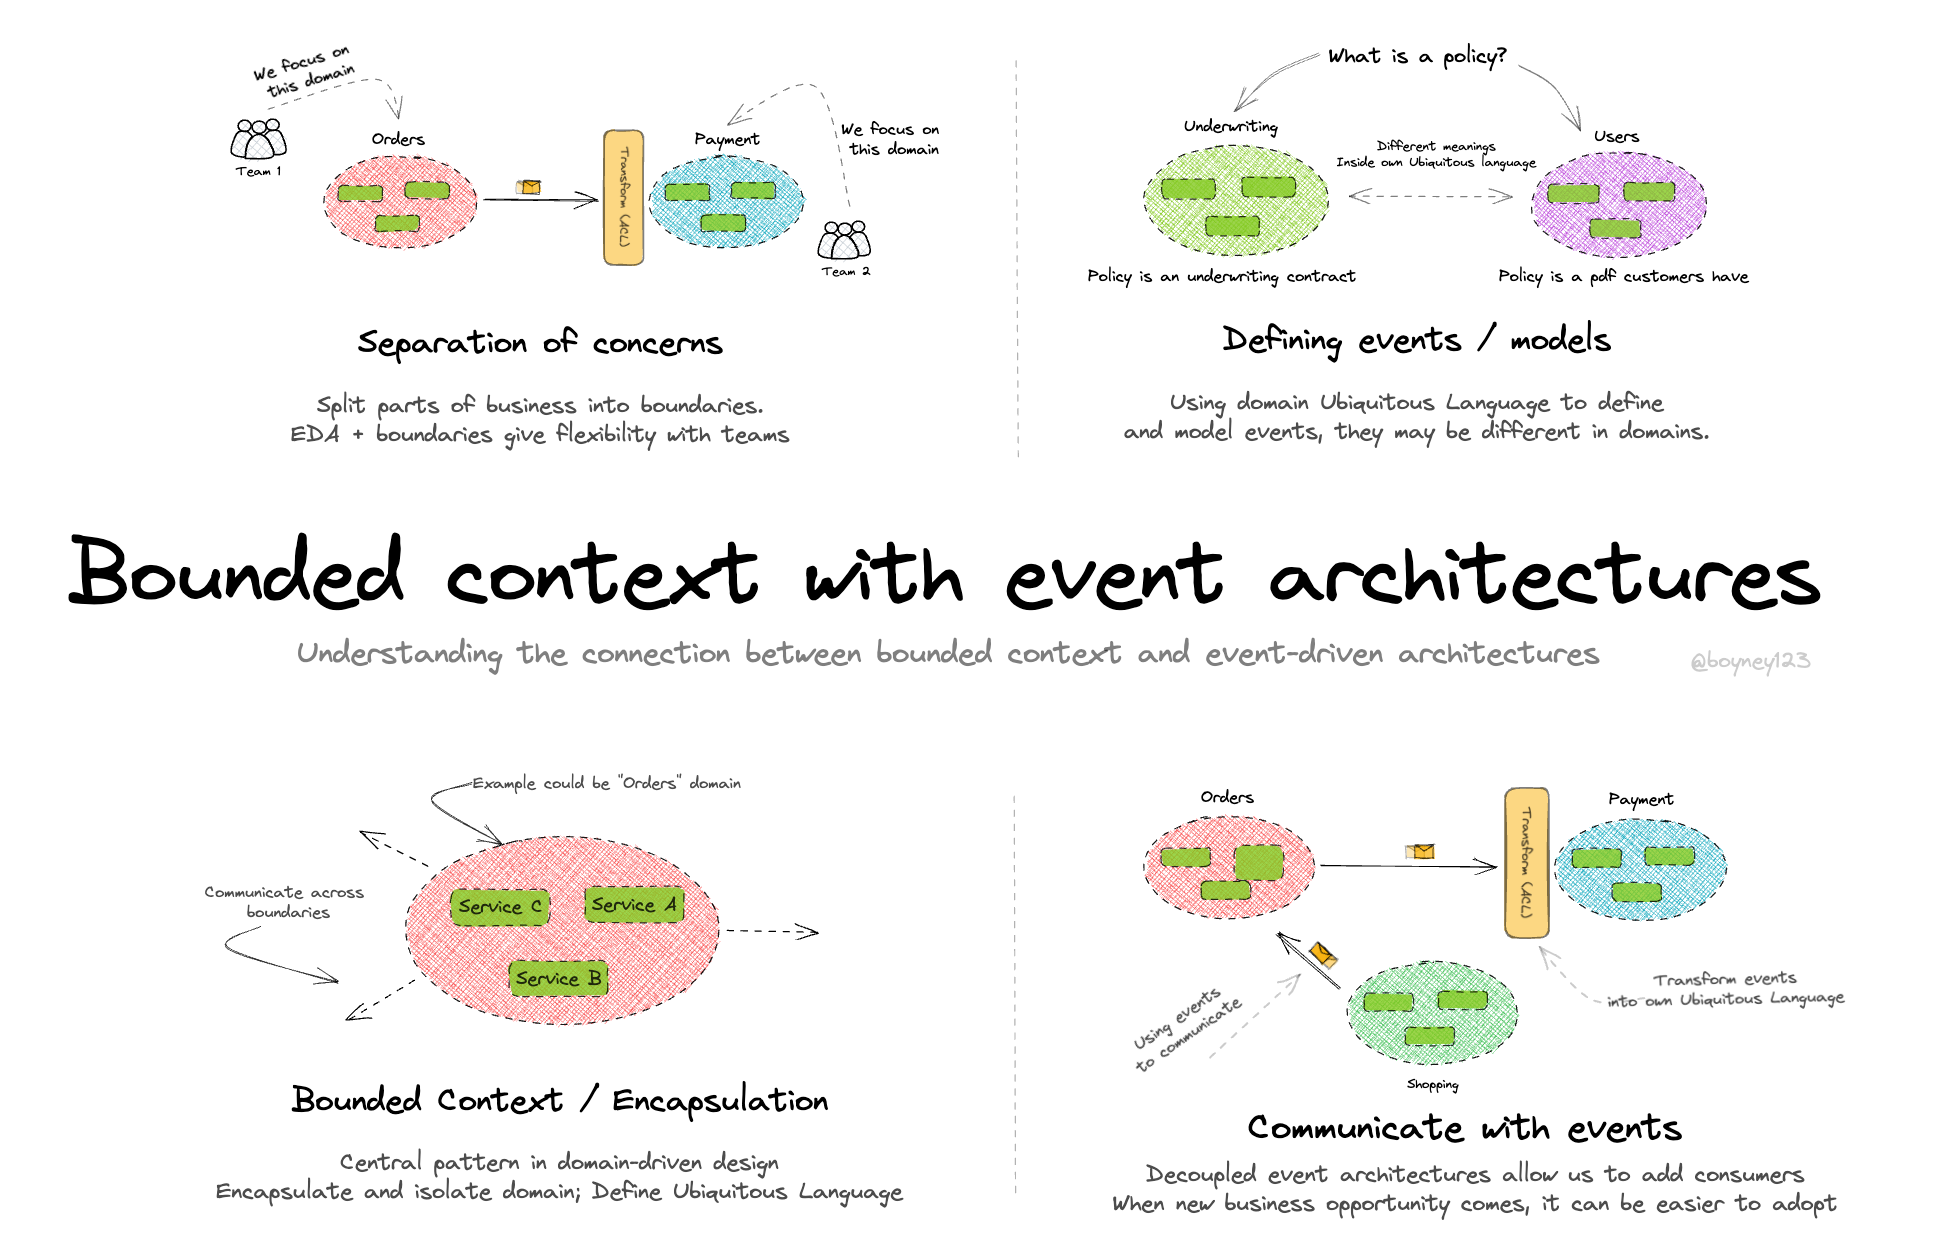 Bounded context with event architectures